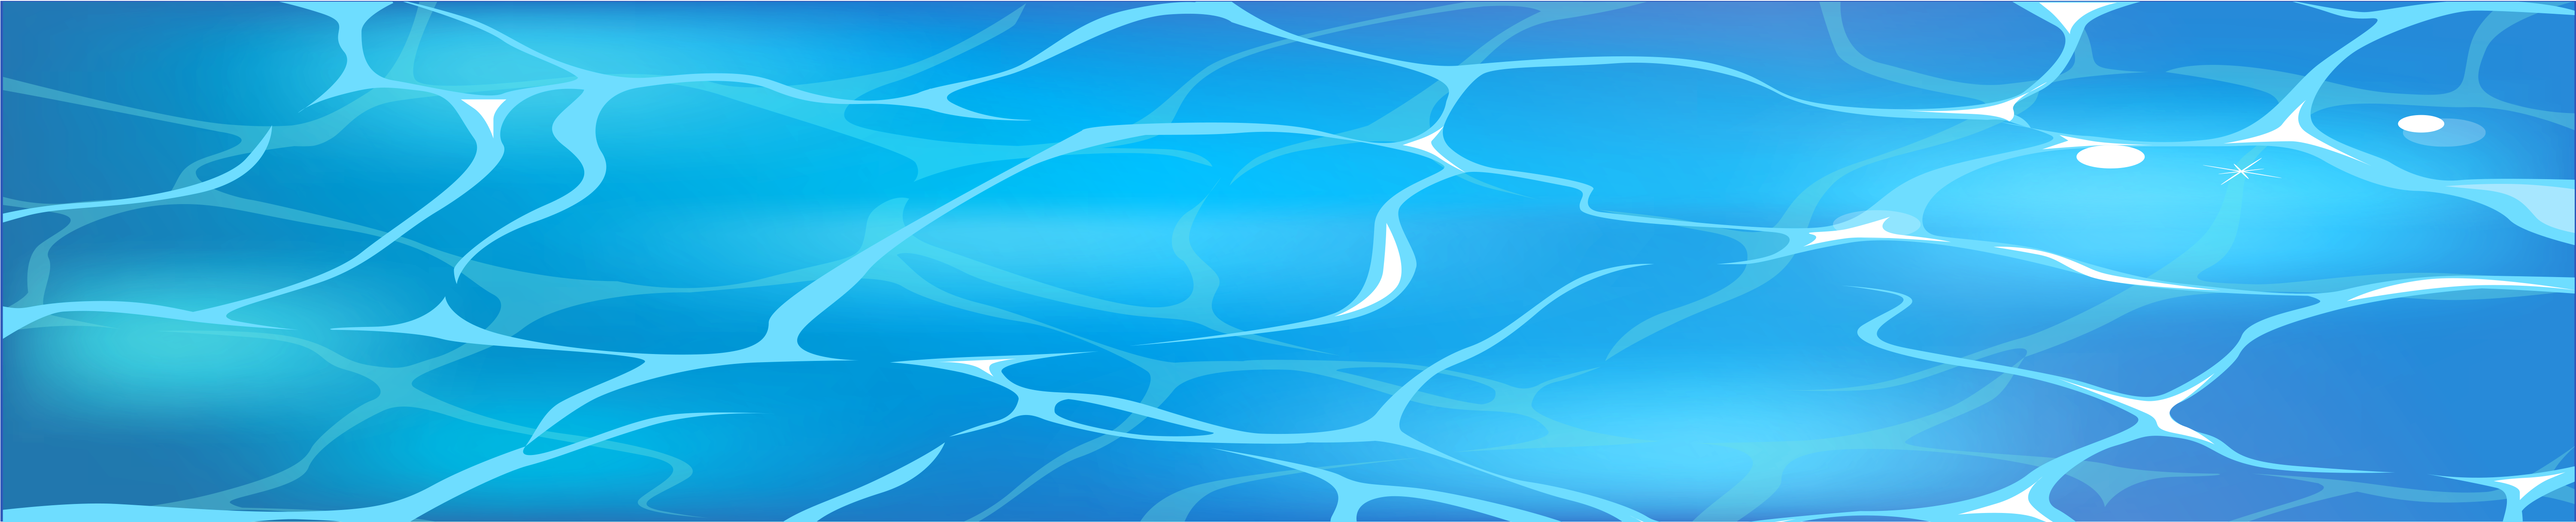 Abstract Blue Water Wave Pattern